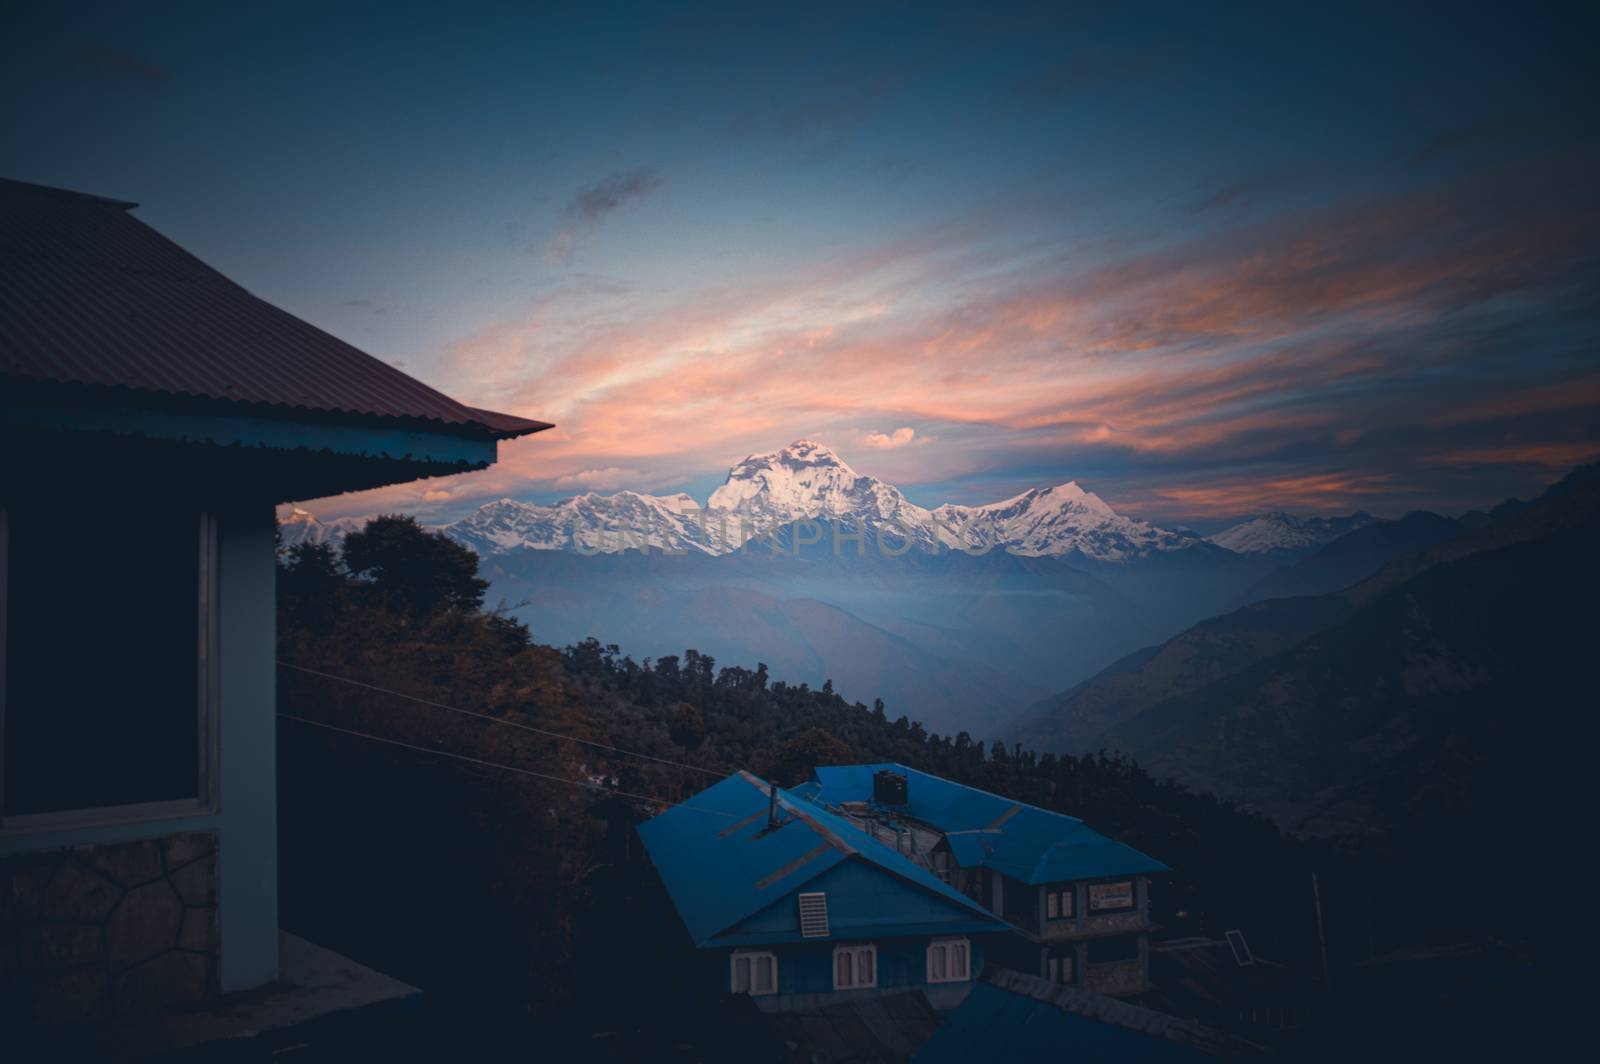 View of the Annapurna Mountain Range from Poon Hill Ghorepani, in Pokhara Nepal during the trek